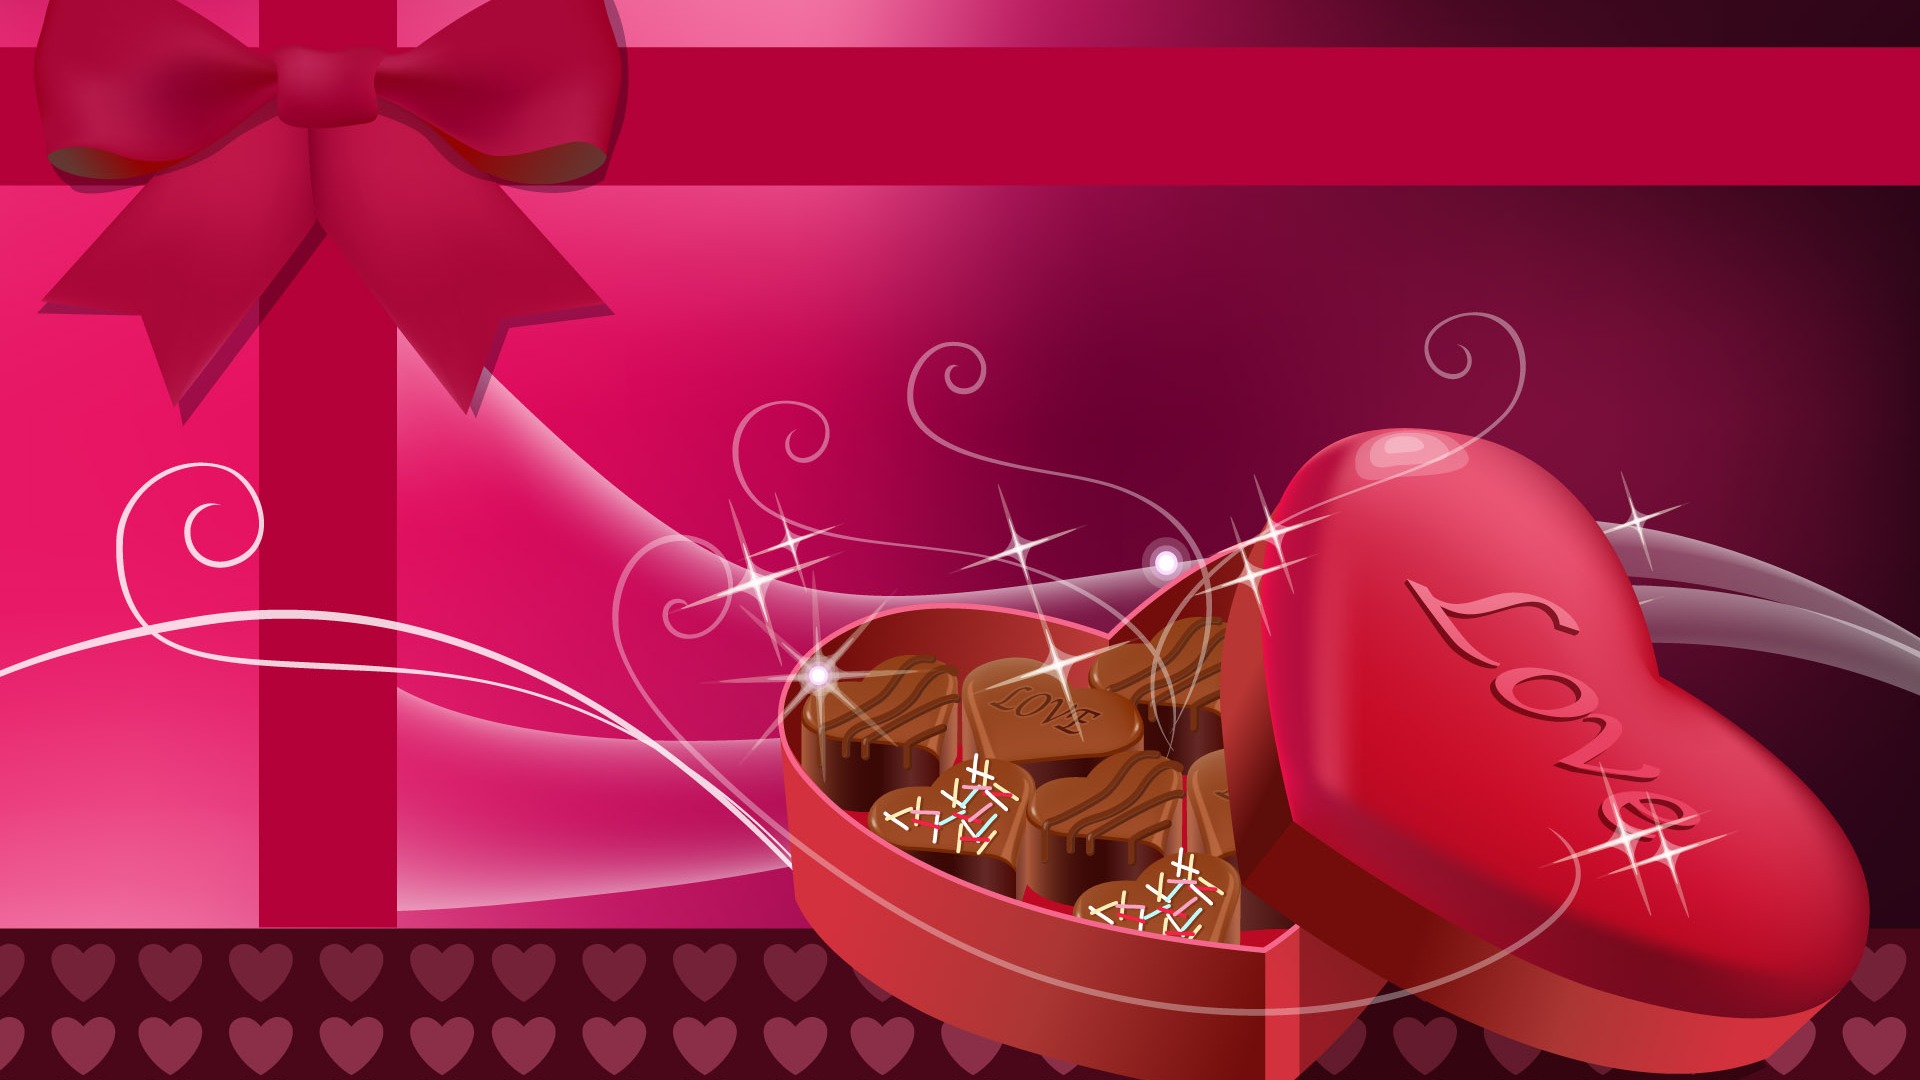 Valentine's Day Love Theme Wallpapers (2) #9 - 1920x1080